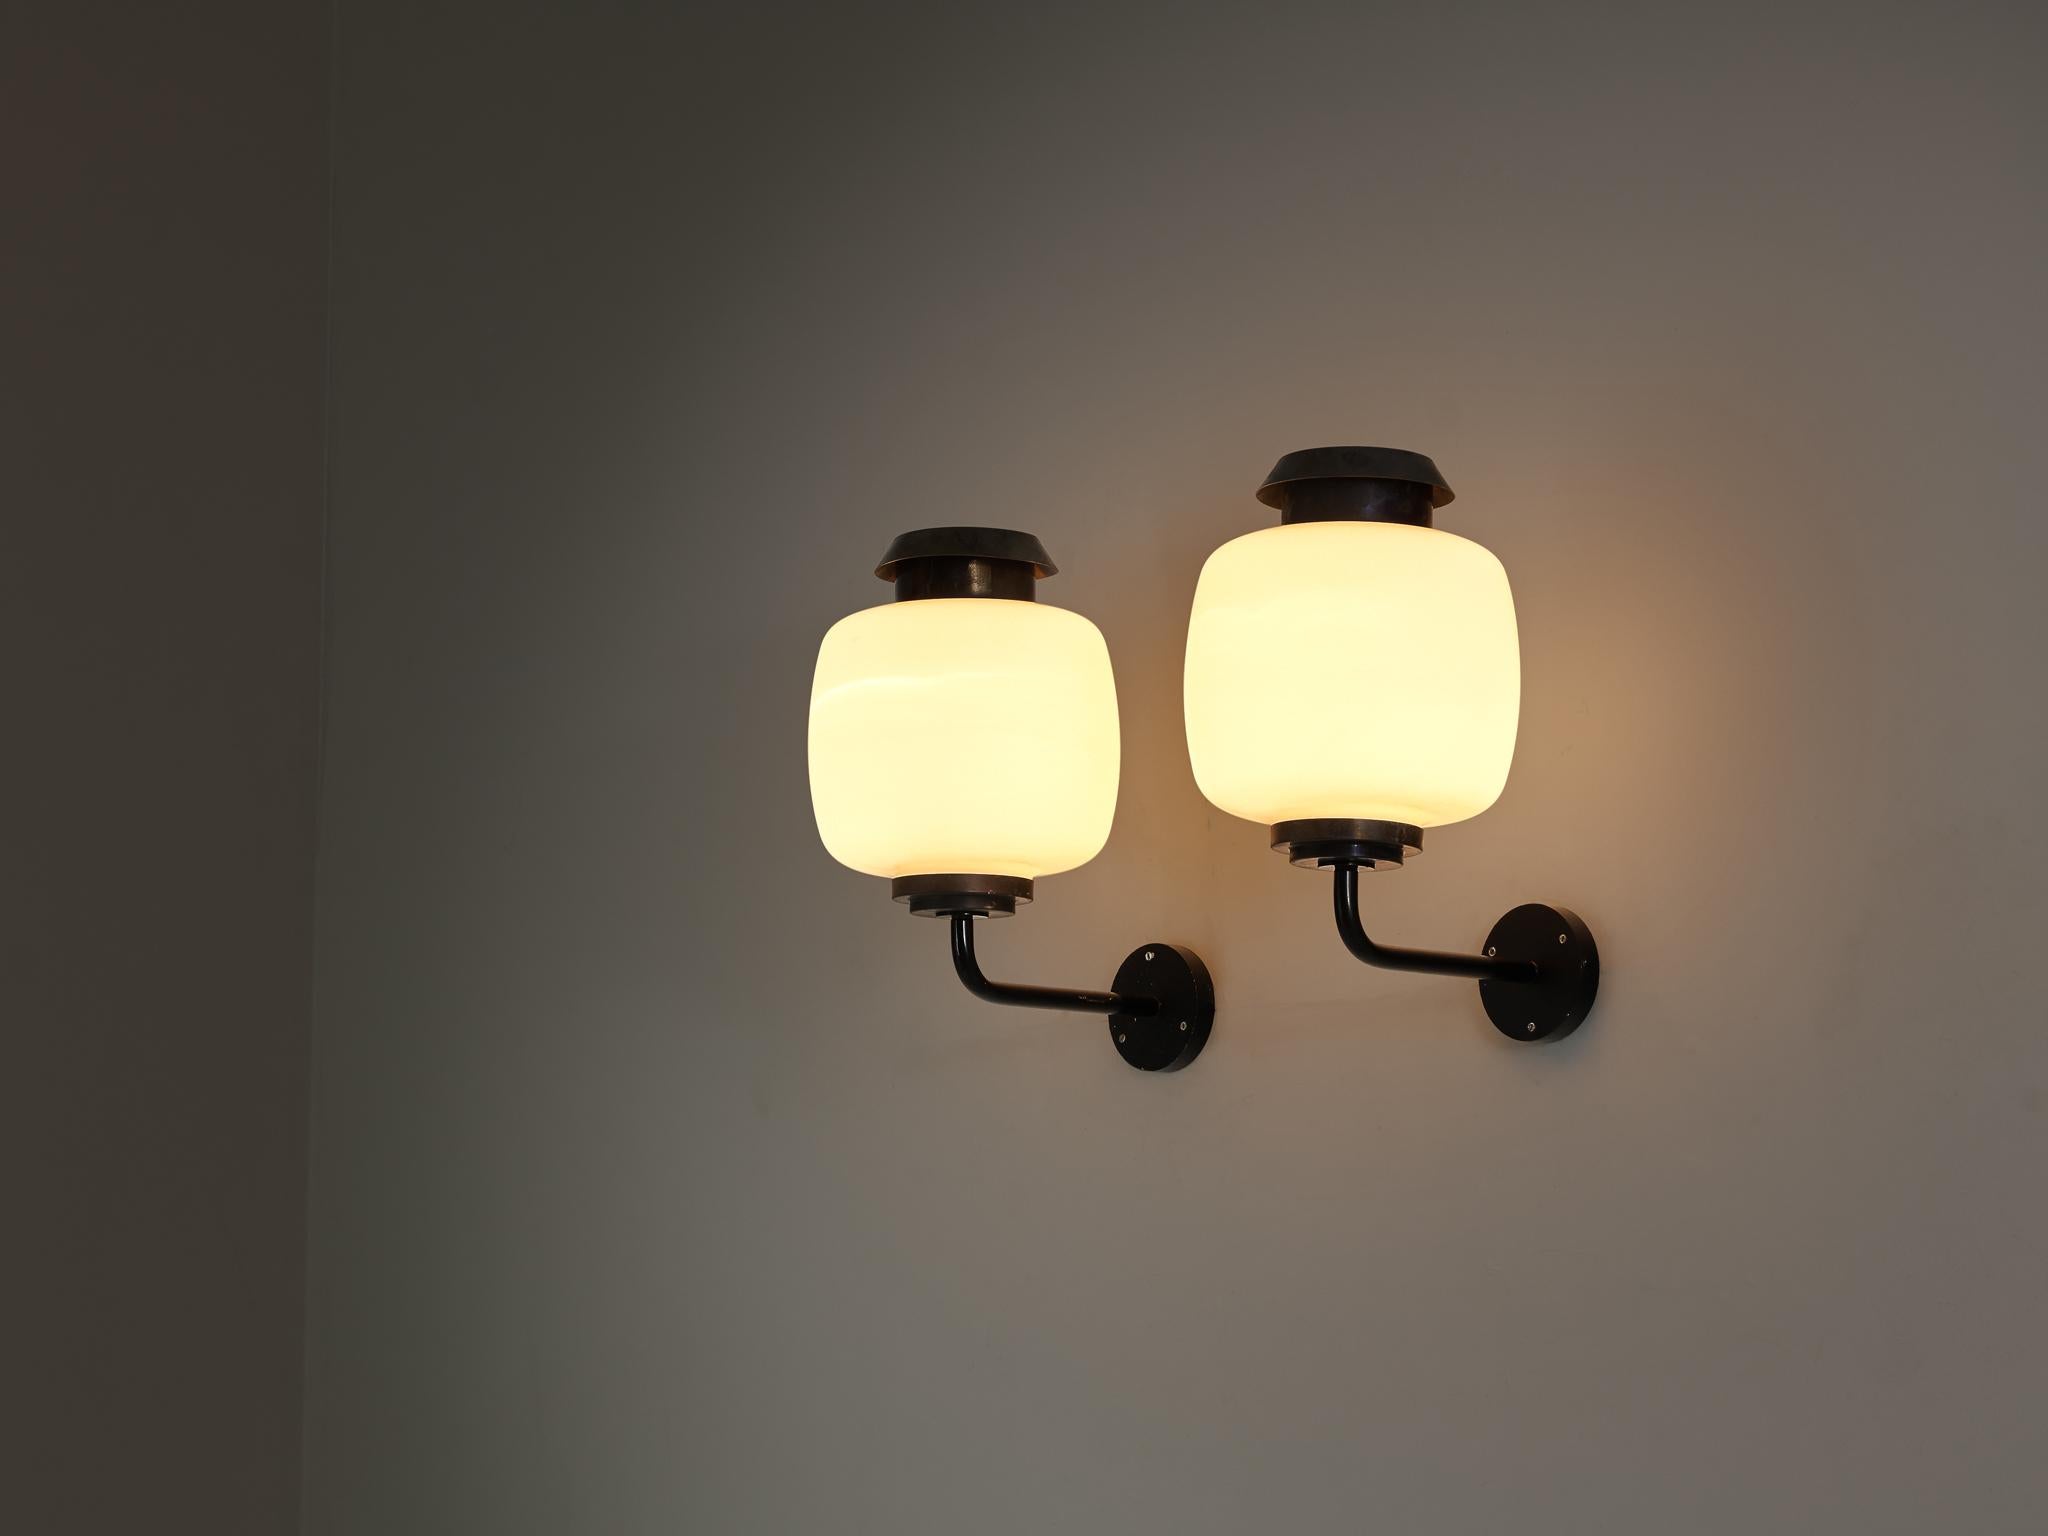 Lyfa, 'Drabant' wall lights, glass, copper, coated steel, Denmark, 1950s/60s

This elegant set of wall lights, made by the Danish lighting company Lyfa, likely dates back to the mid-20th century. Each lamp features a beautiful, spherical shade made